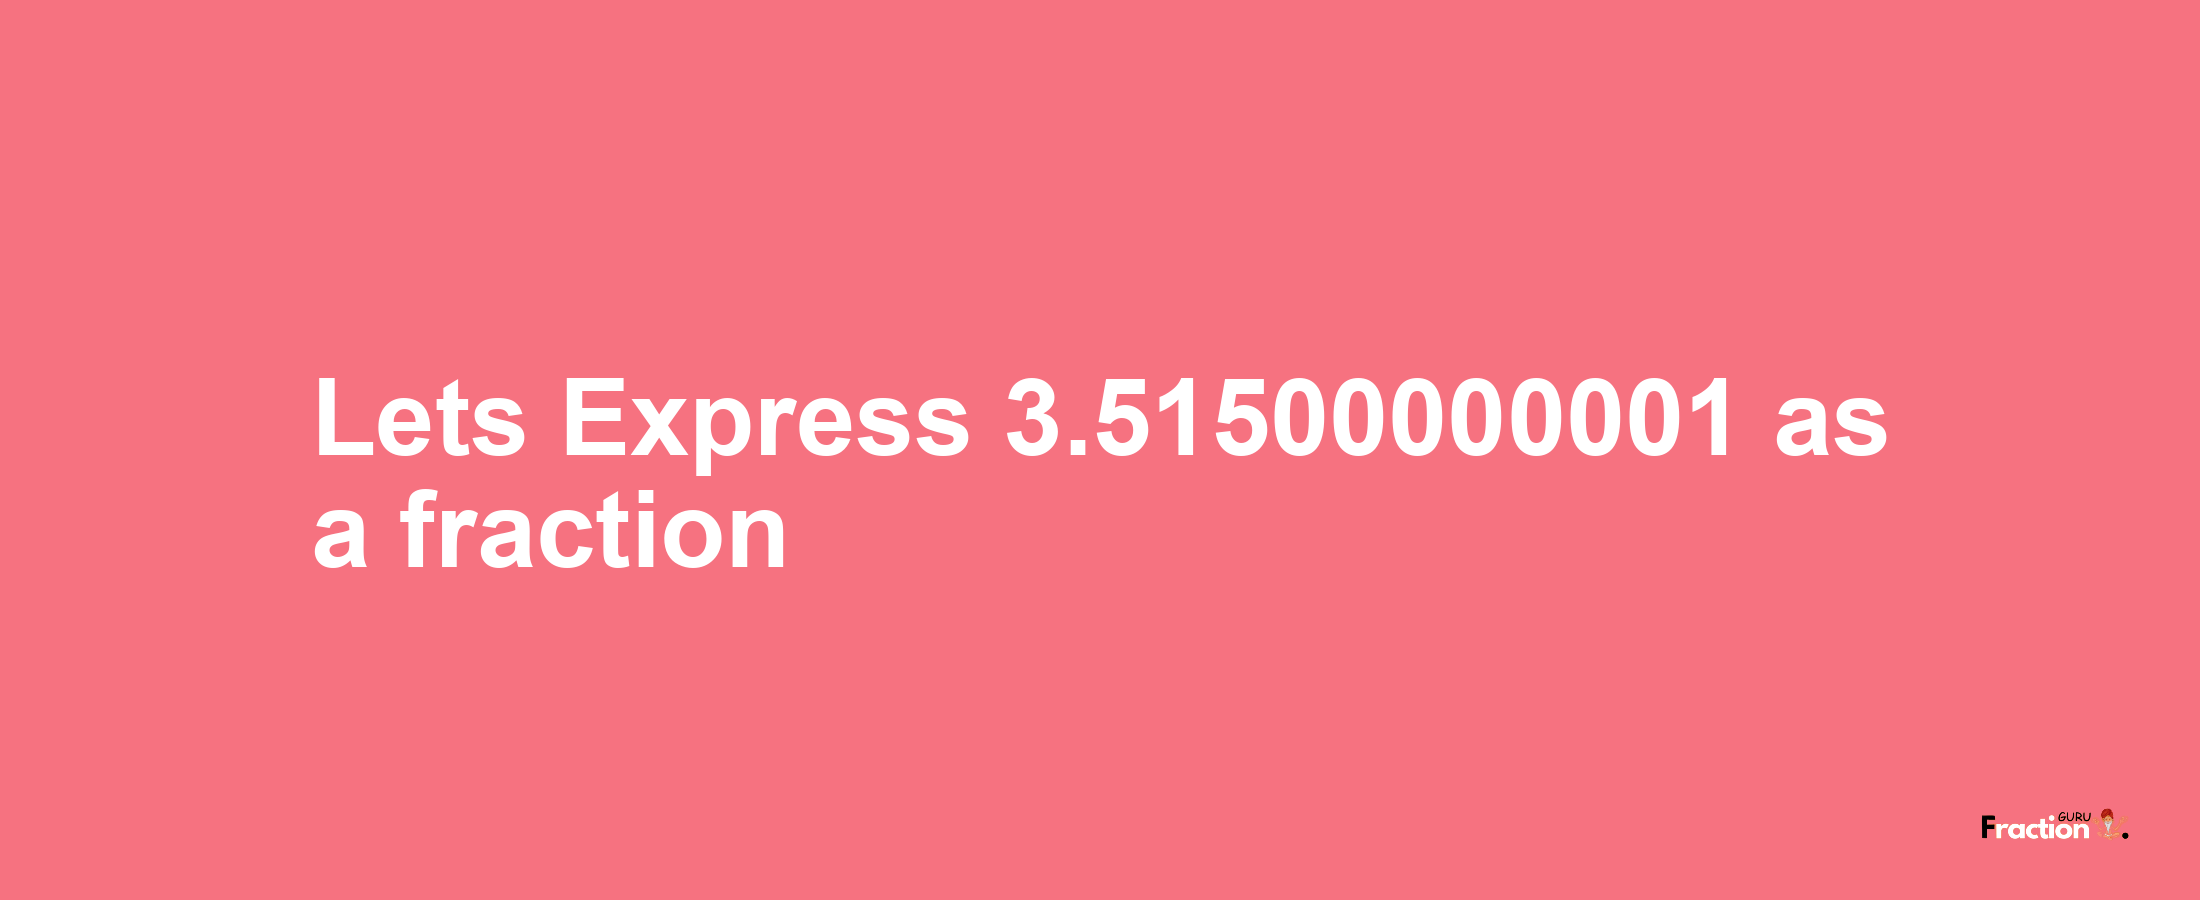 Lets Express 3.51500000001 as afraction